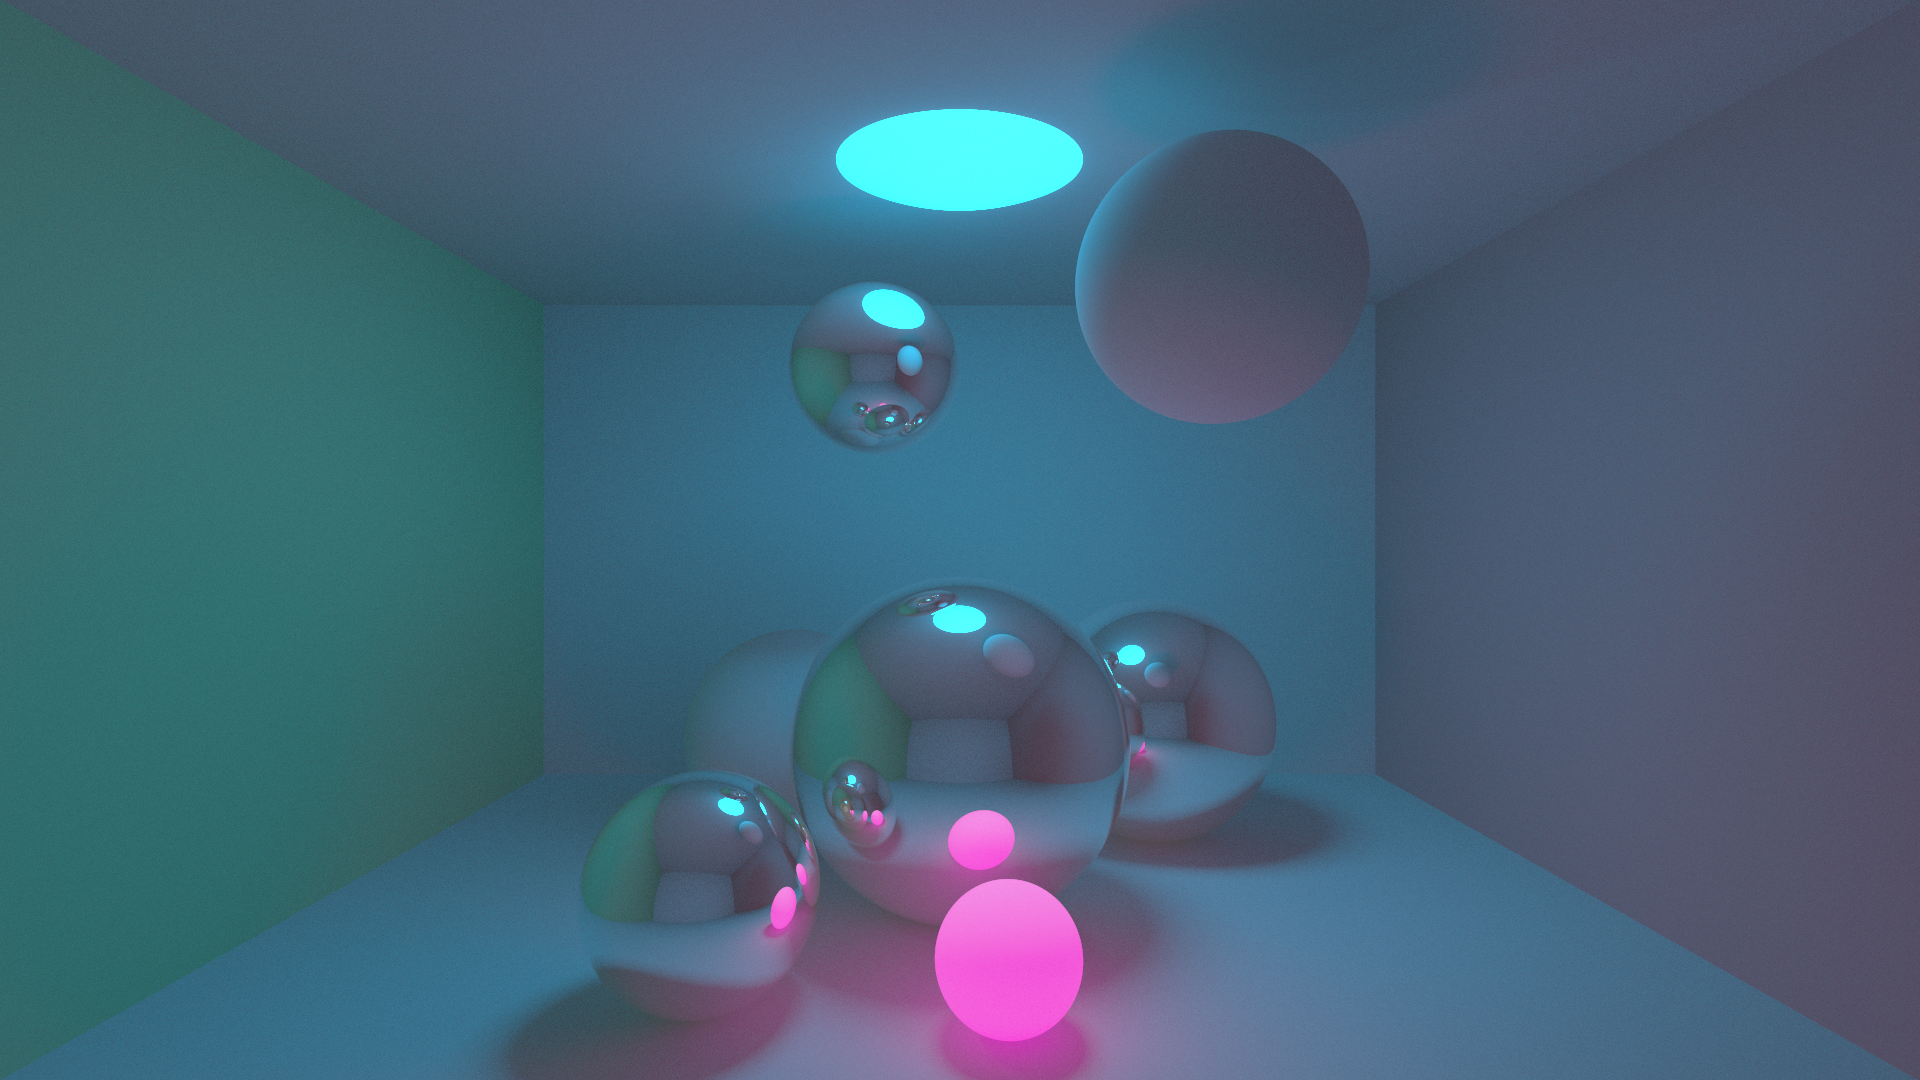 path tracing result
13.10.2022